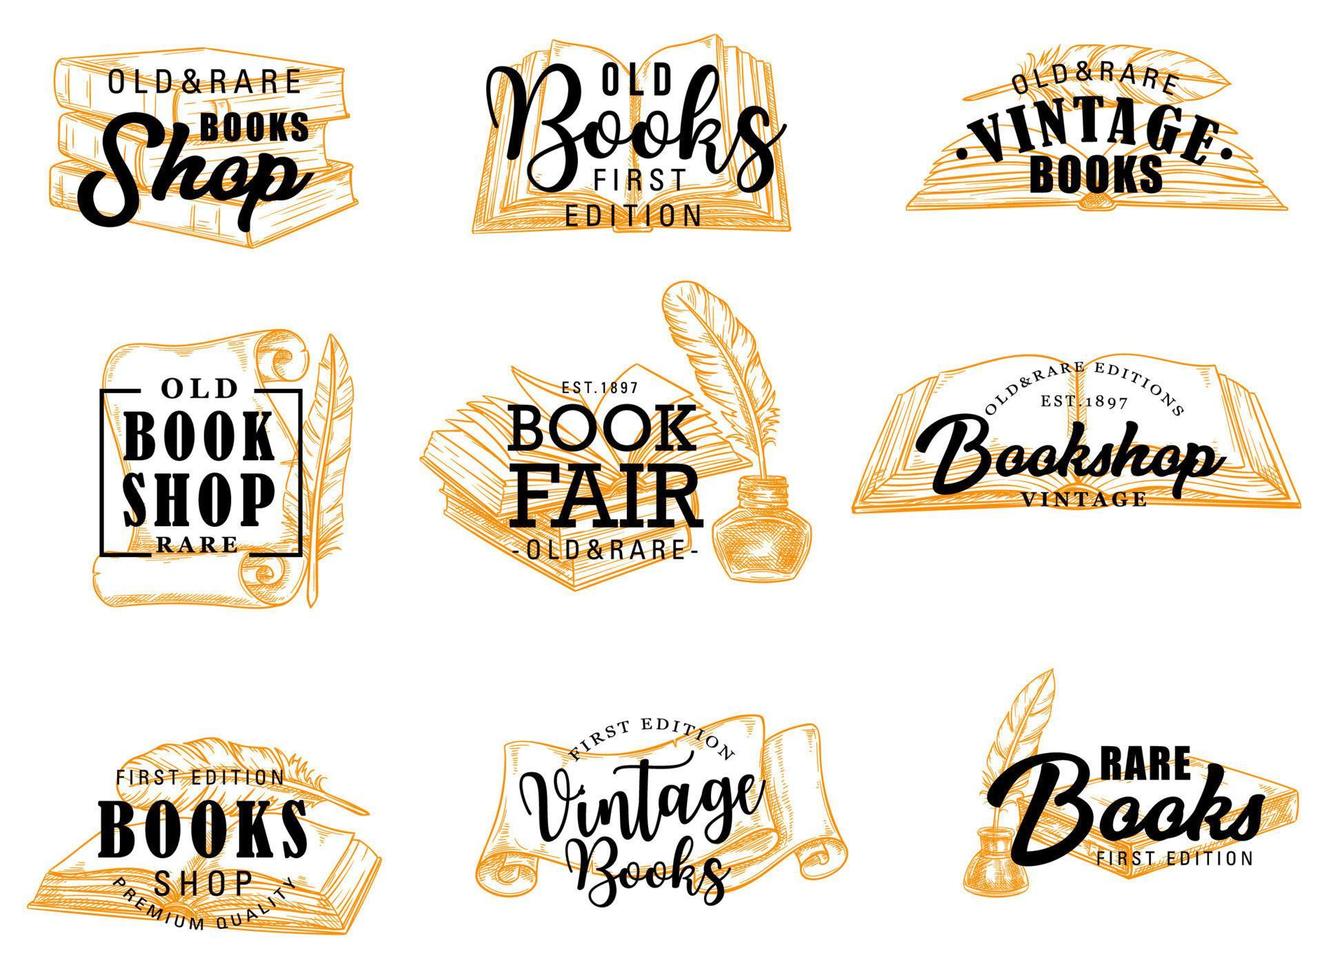 Books and manuscripts vector icons, lettering